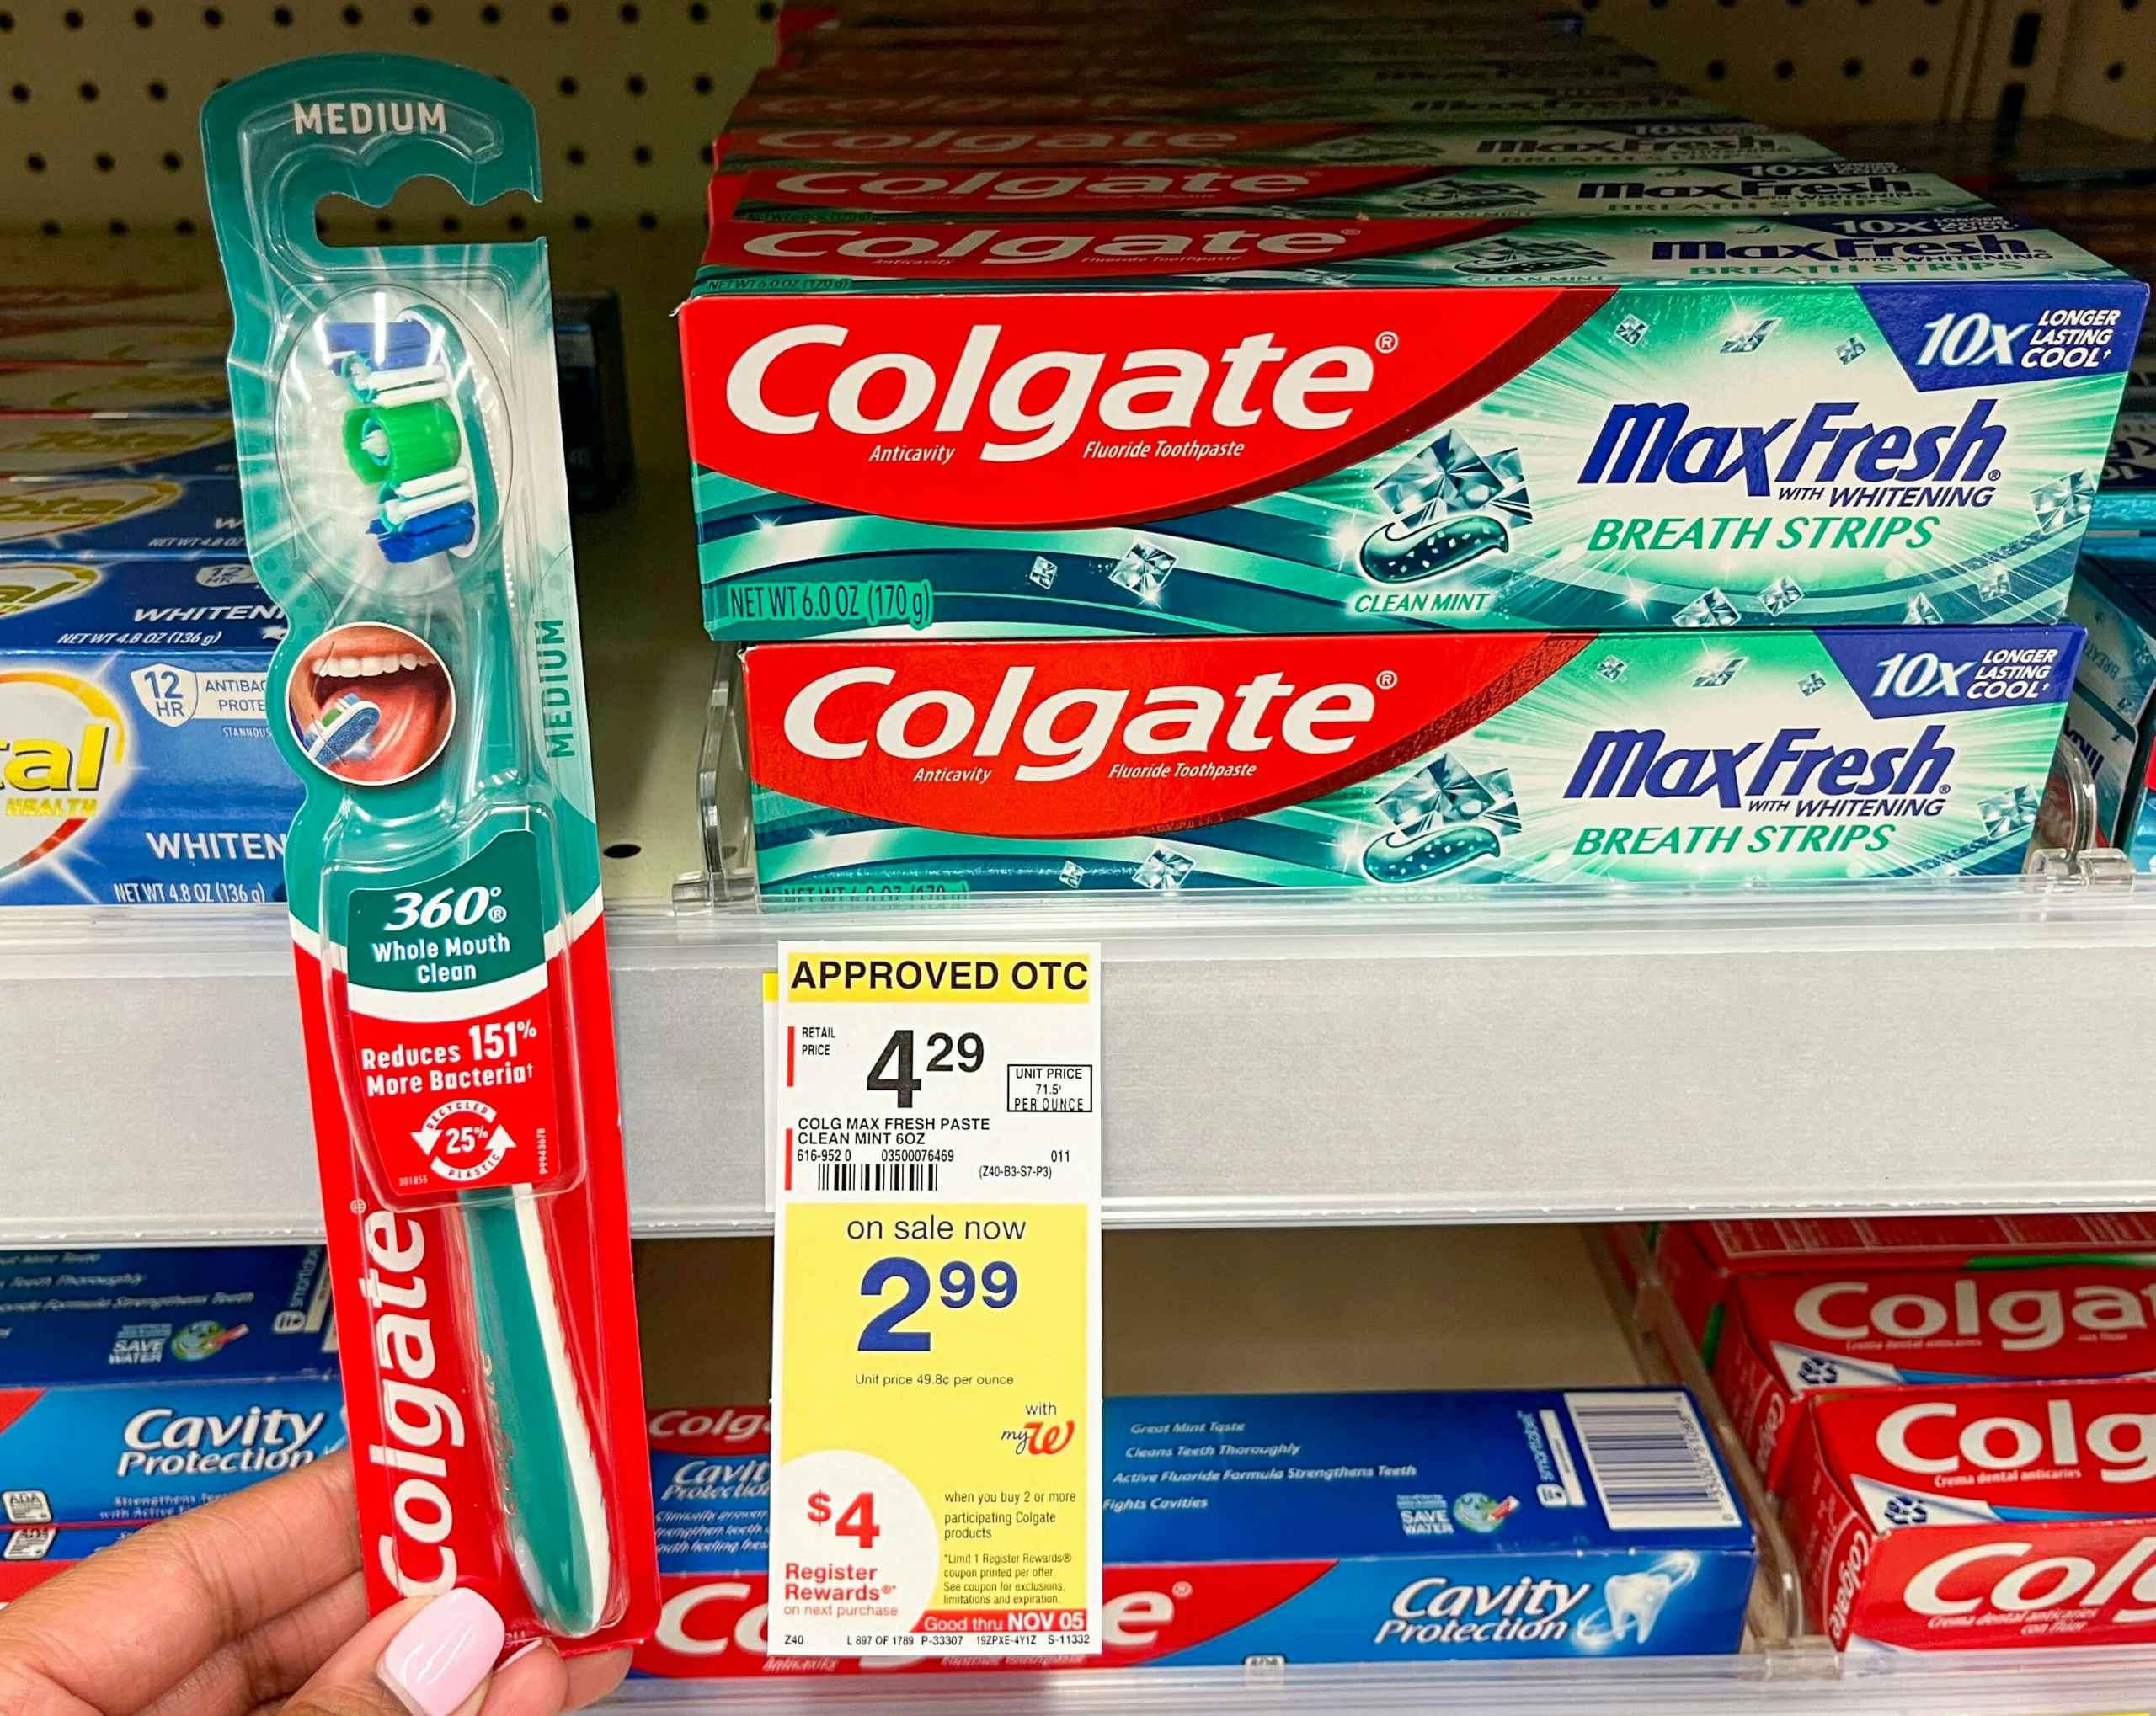 hand holding Colgate manual toothbrush next to Colgate toothpaste and sales tag on shelf